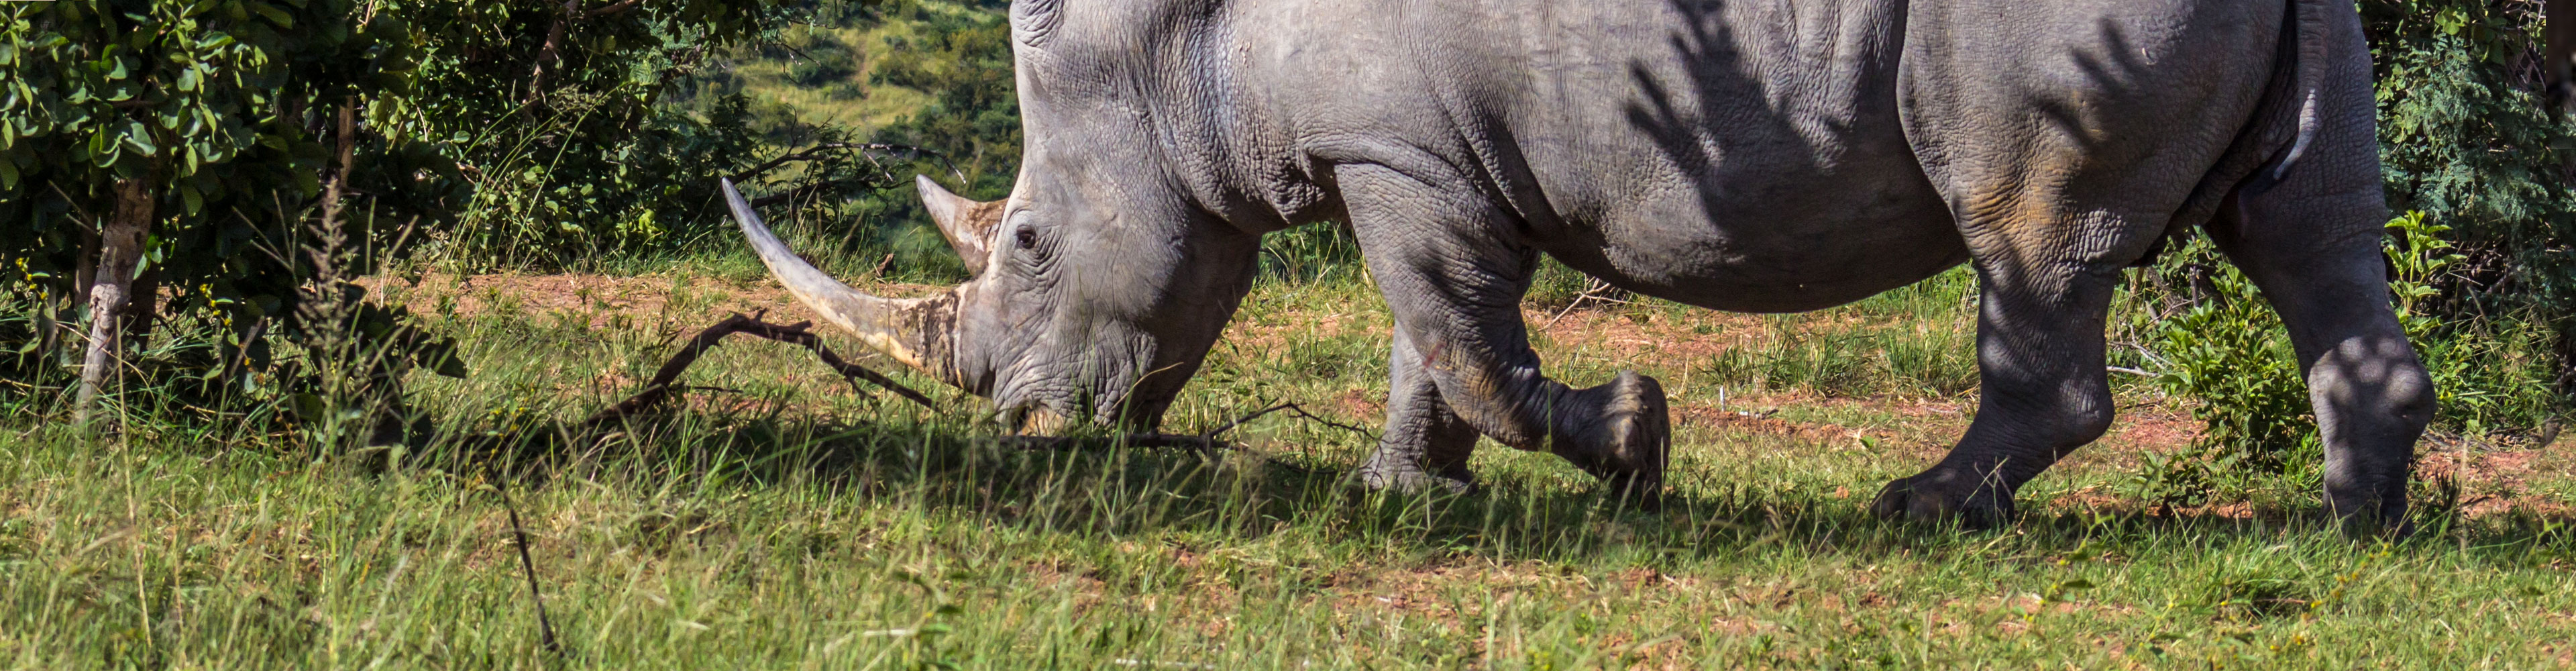 East Africa Expedition: The Last Northern White Rhinos